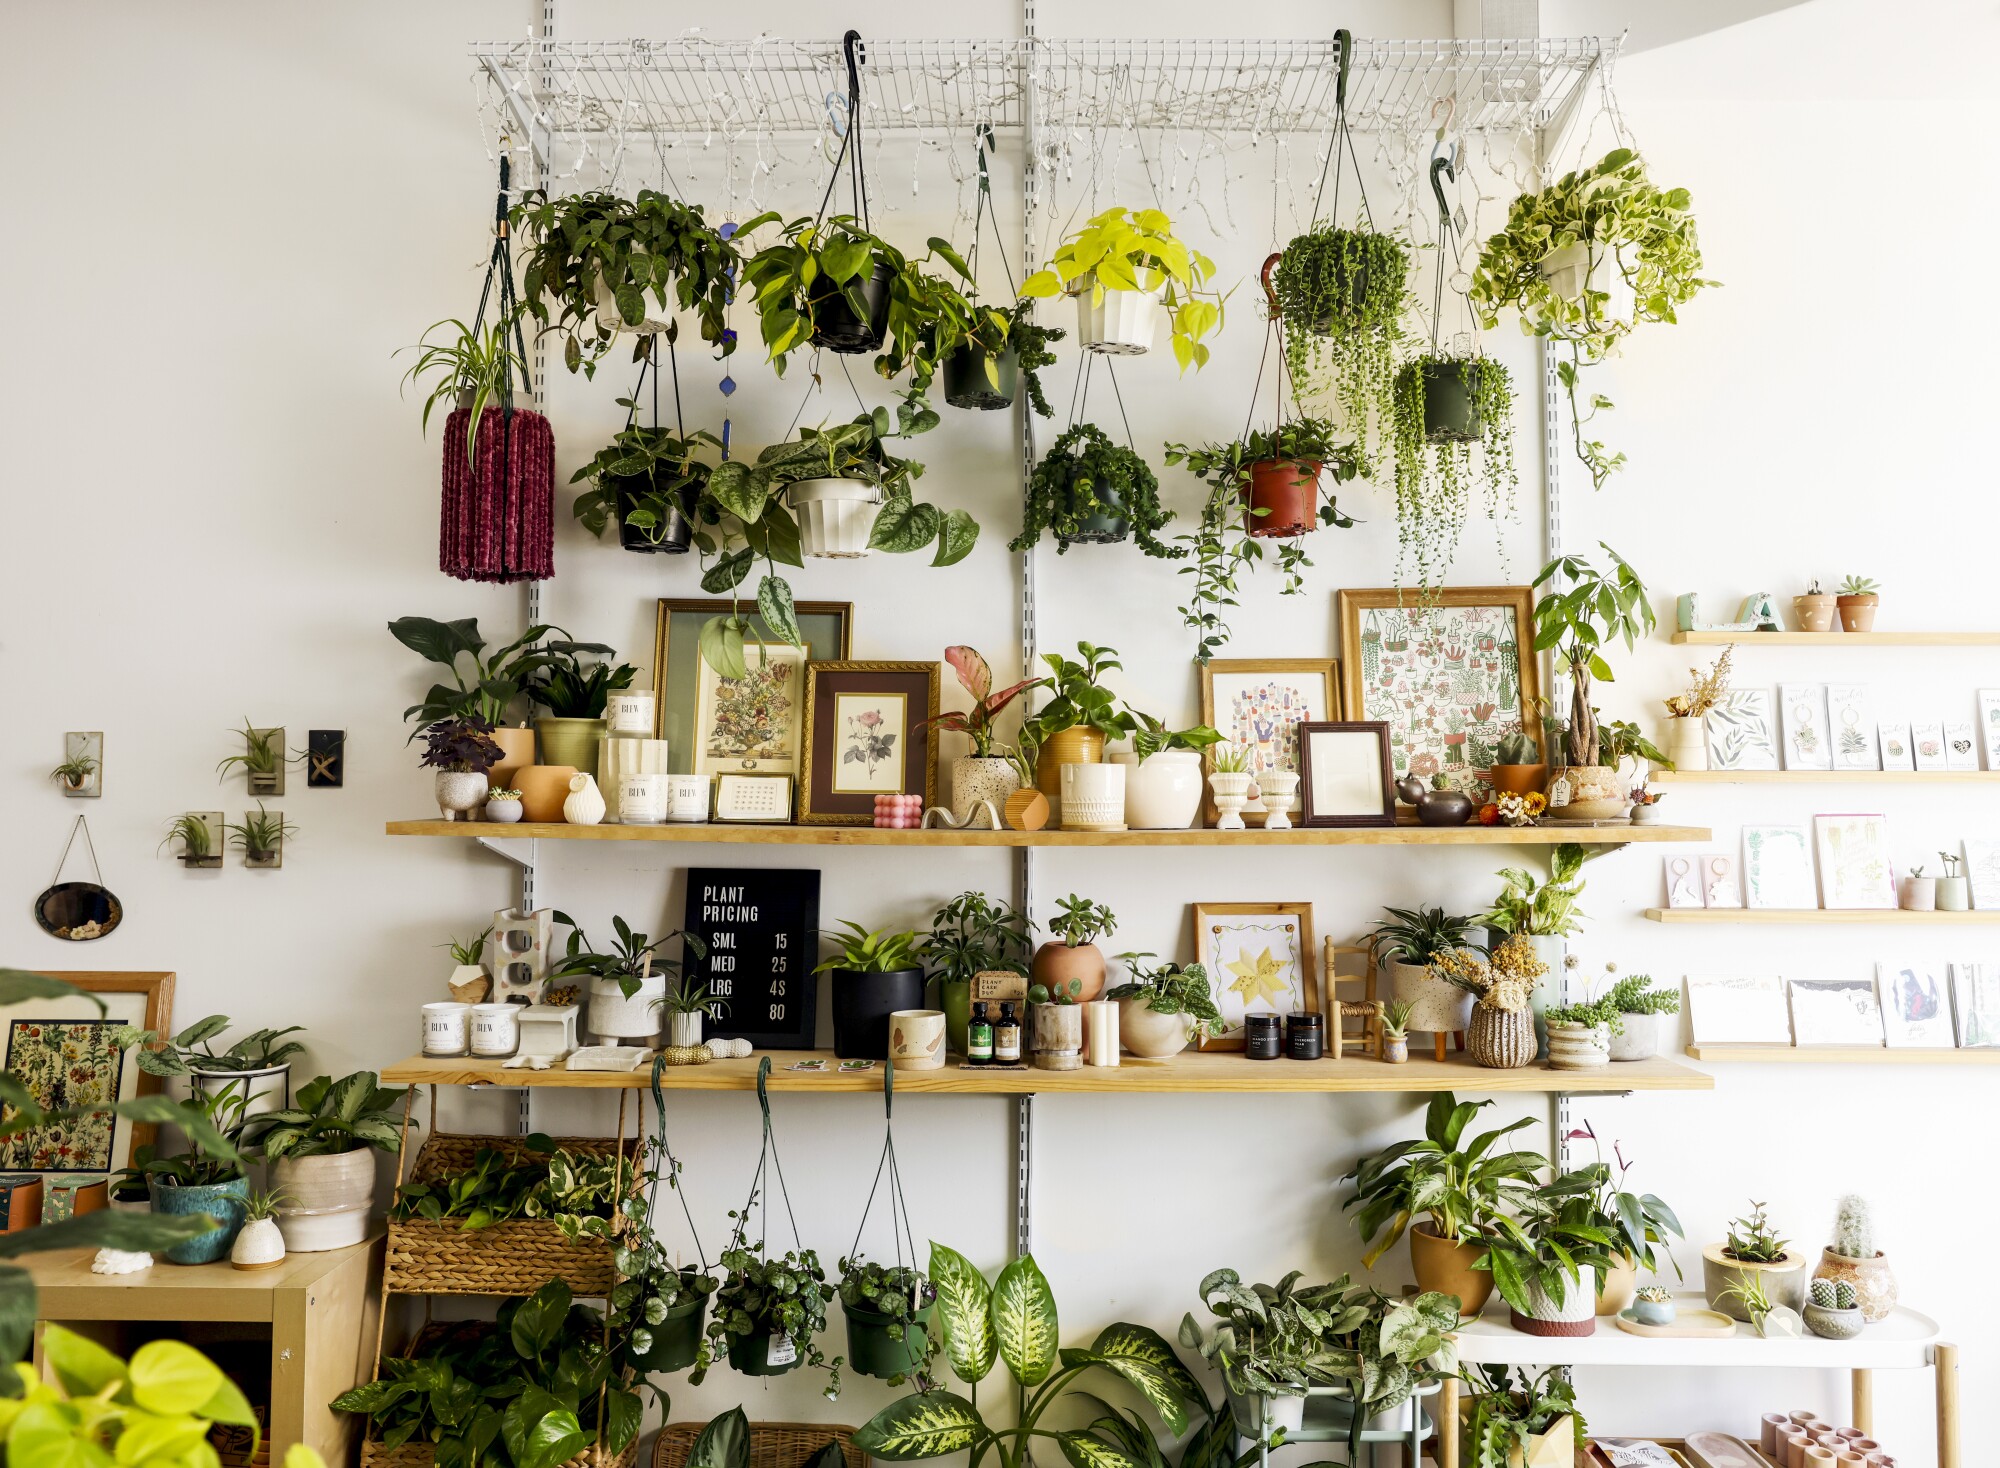 Gifts on plants, ceramics and shelves 